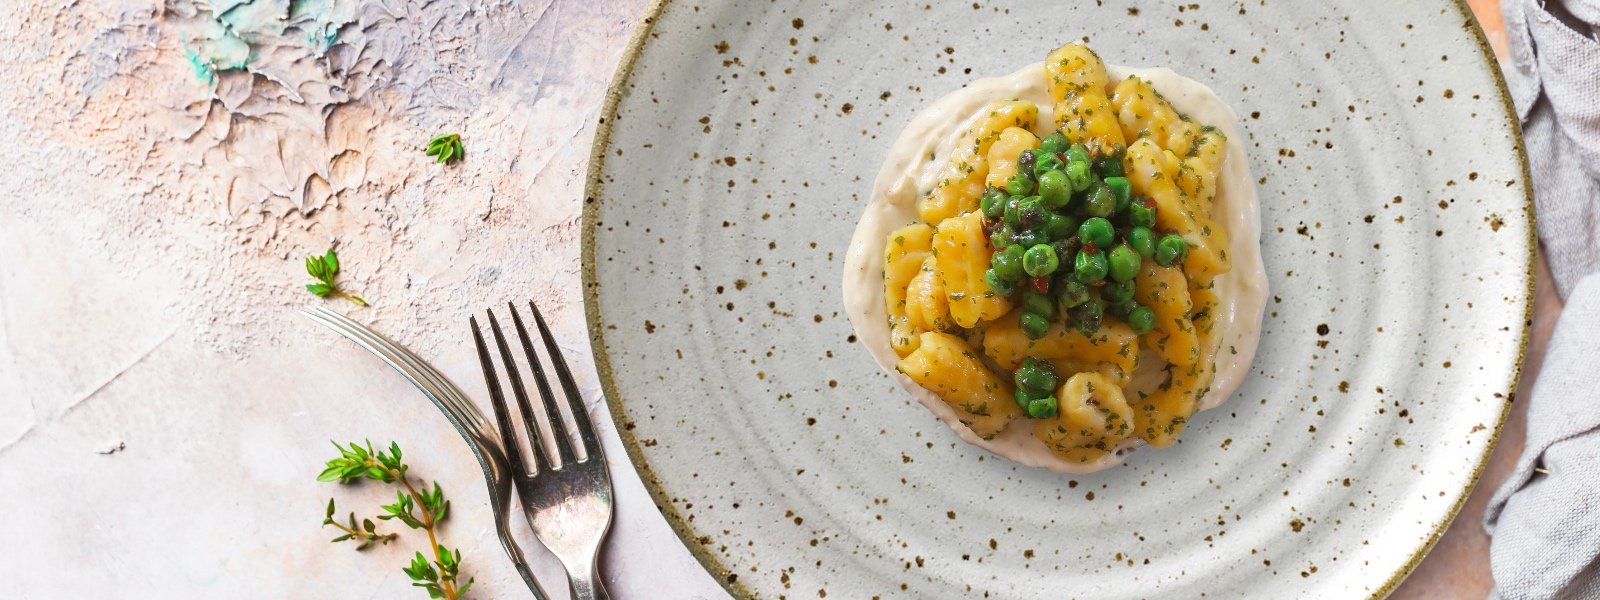 Carrot Gnocchi With Cheese Fondue And Green Peas